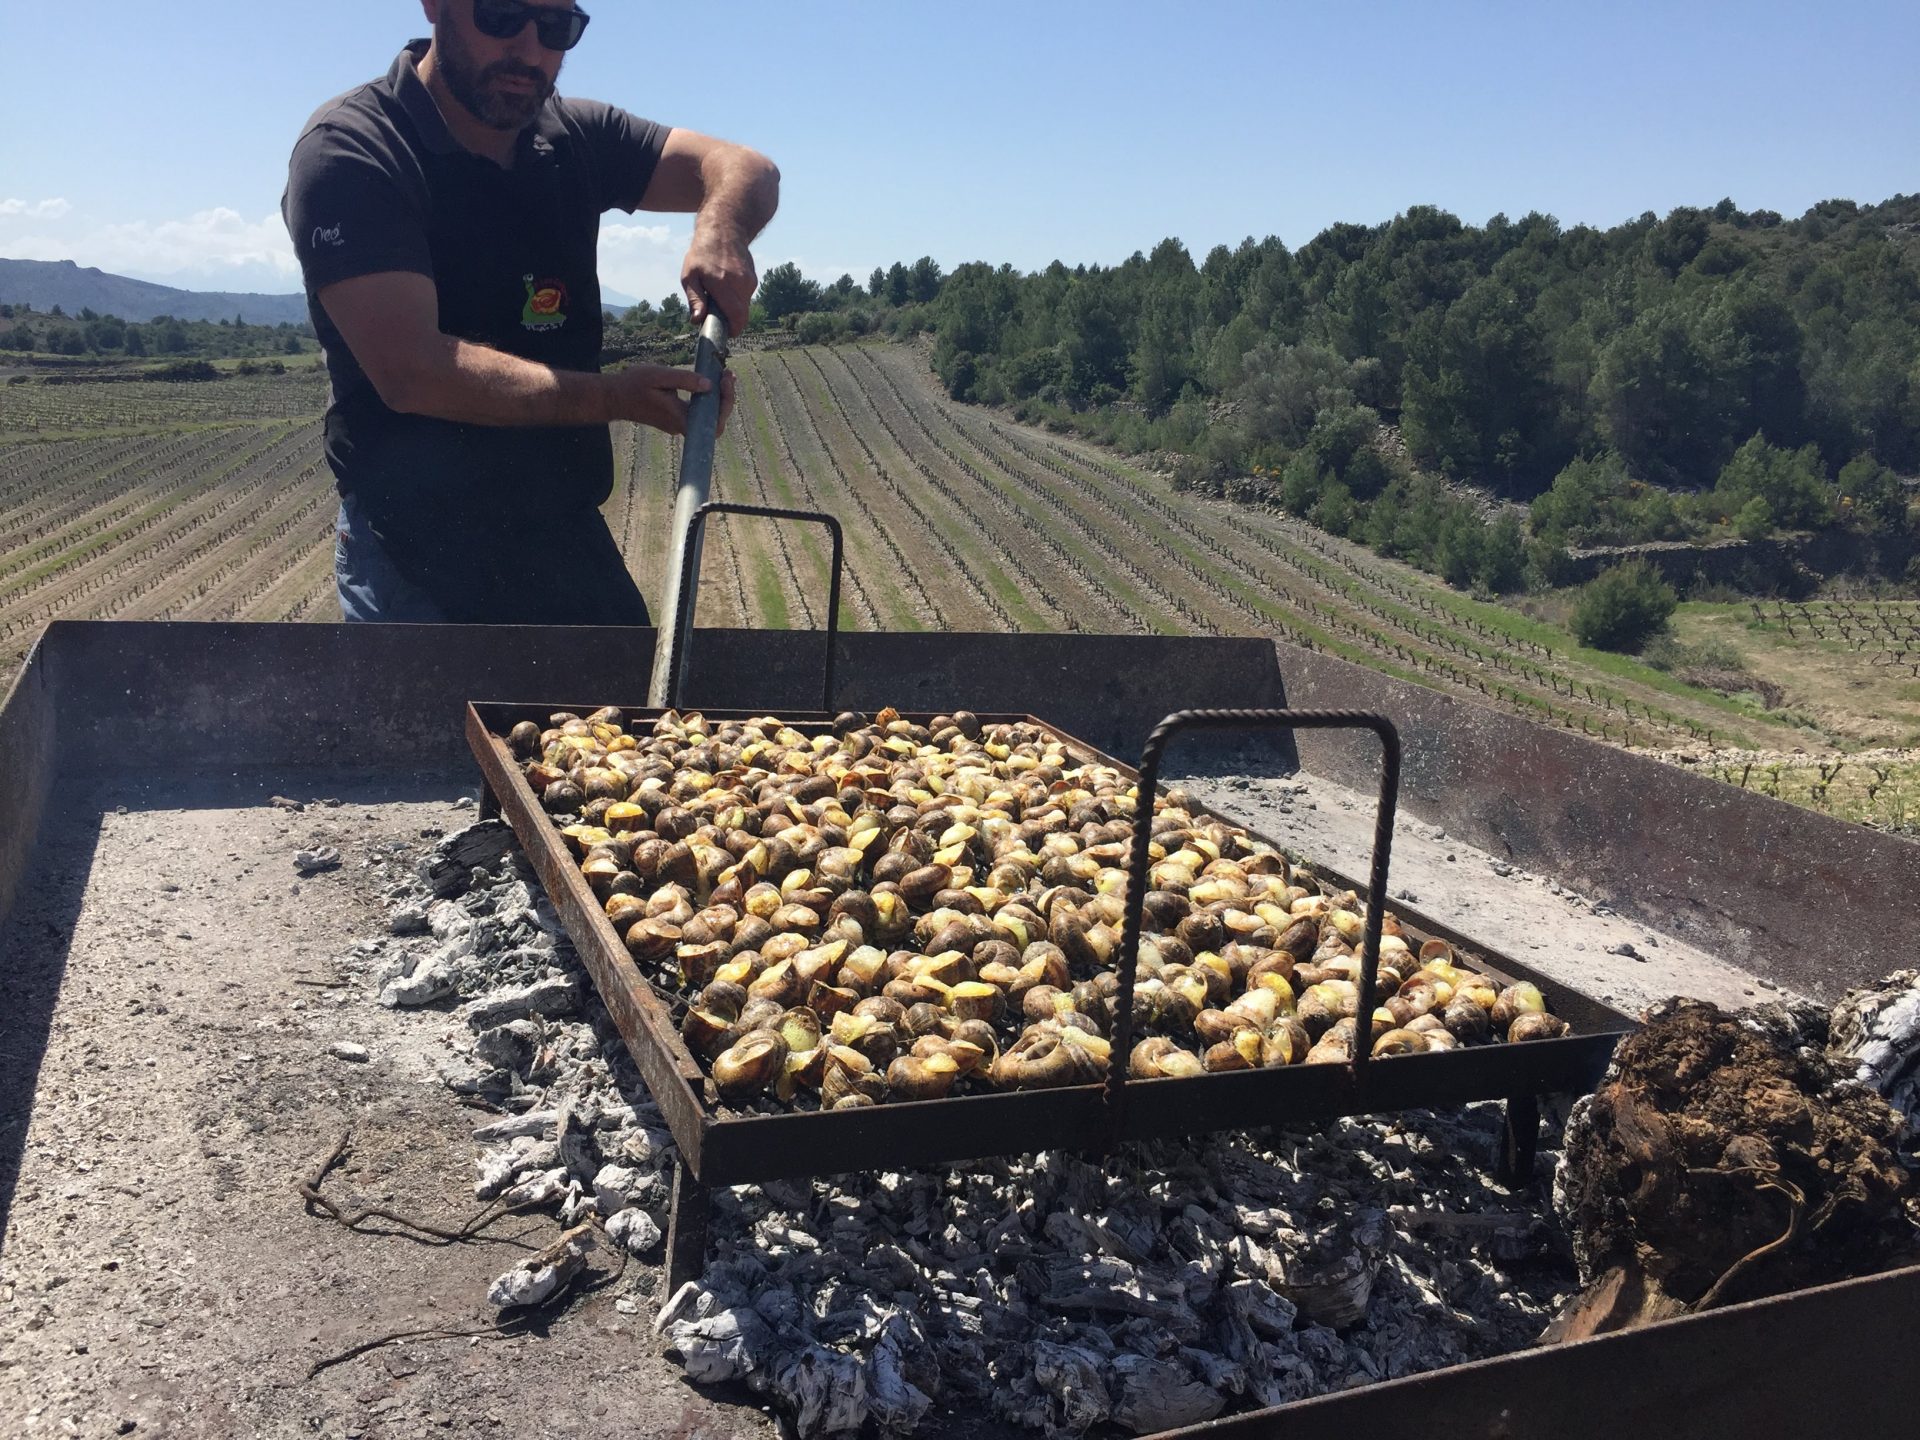 Classic Catalan barbeque snails in the hillside vineyards of the Roussillon. One of the most enjoyable culinary experiences I have ever had the pleasure of indulging in.